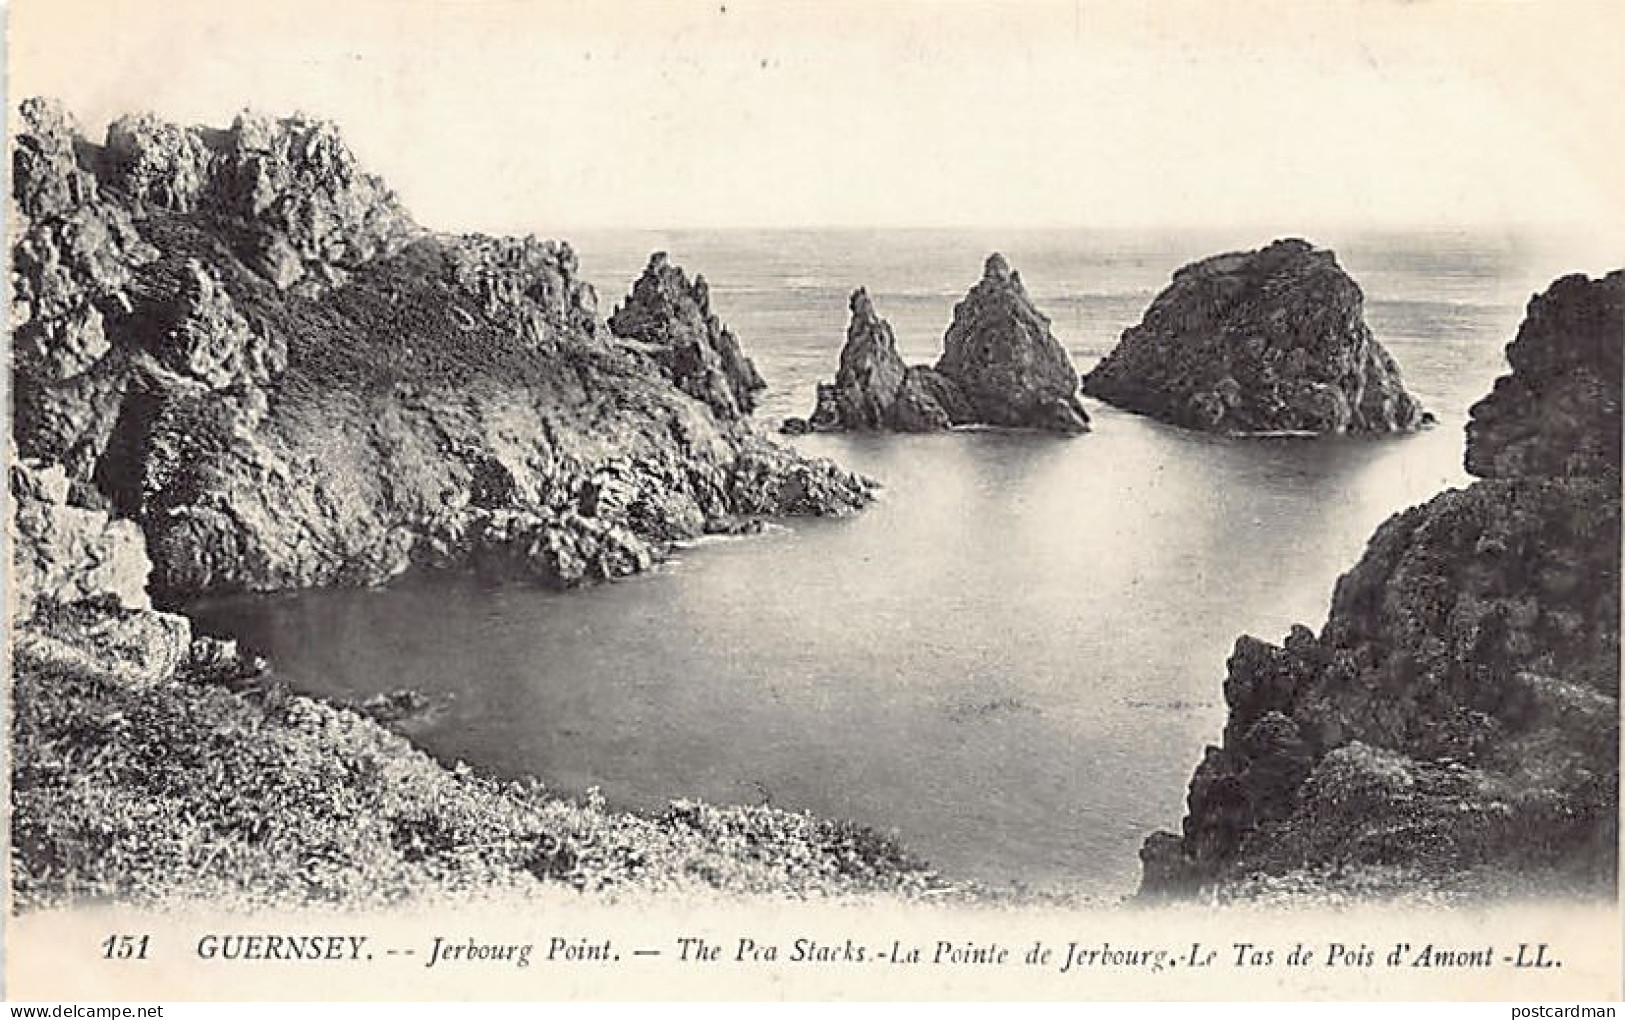 Guernsey - JERBOURG POINT - The Pea Stacks - Publ. LL Levy 151 - Guernsey